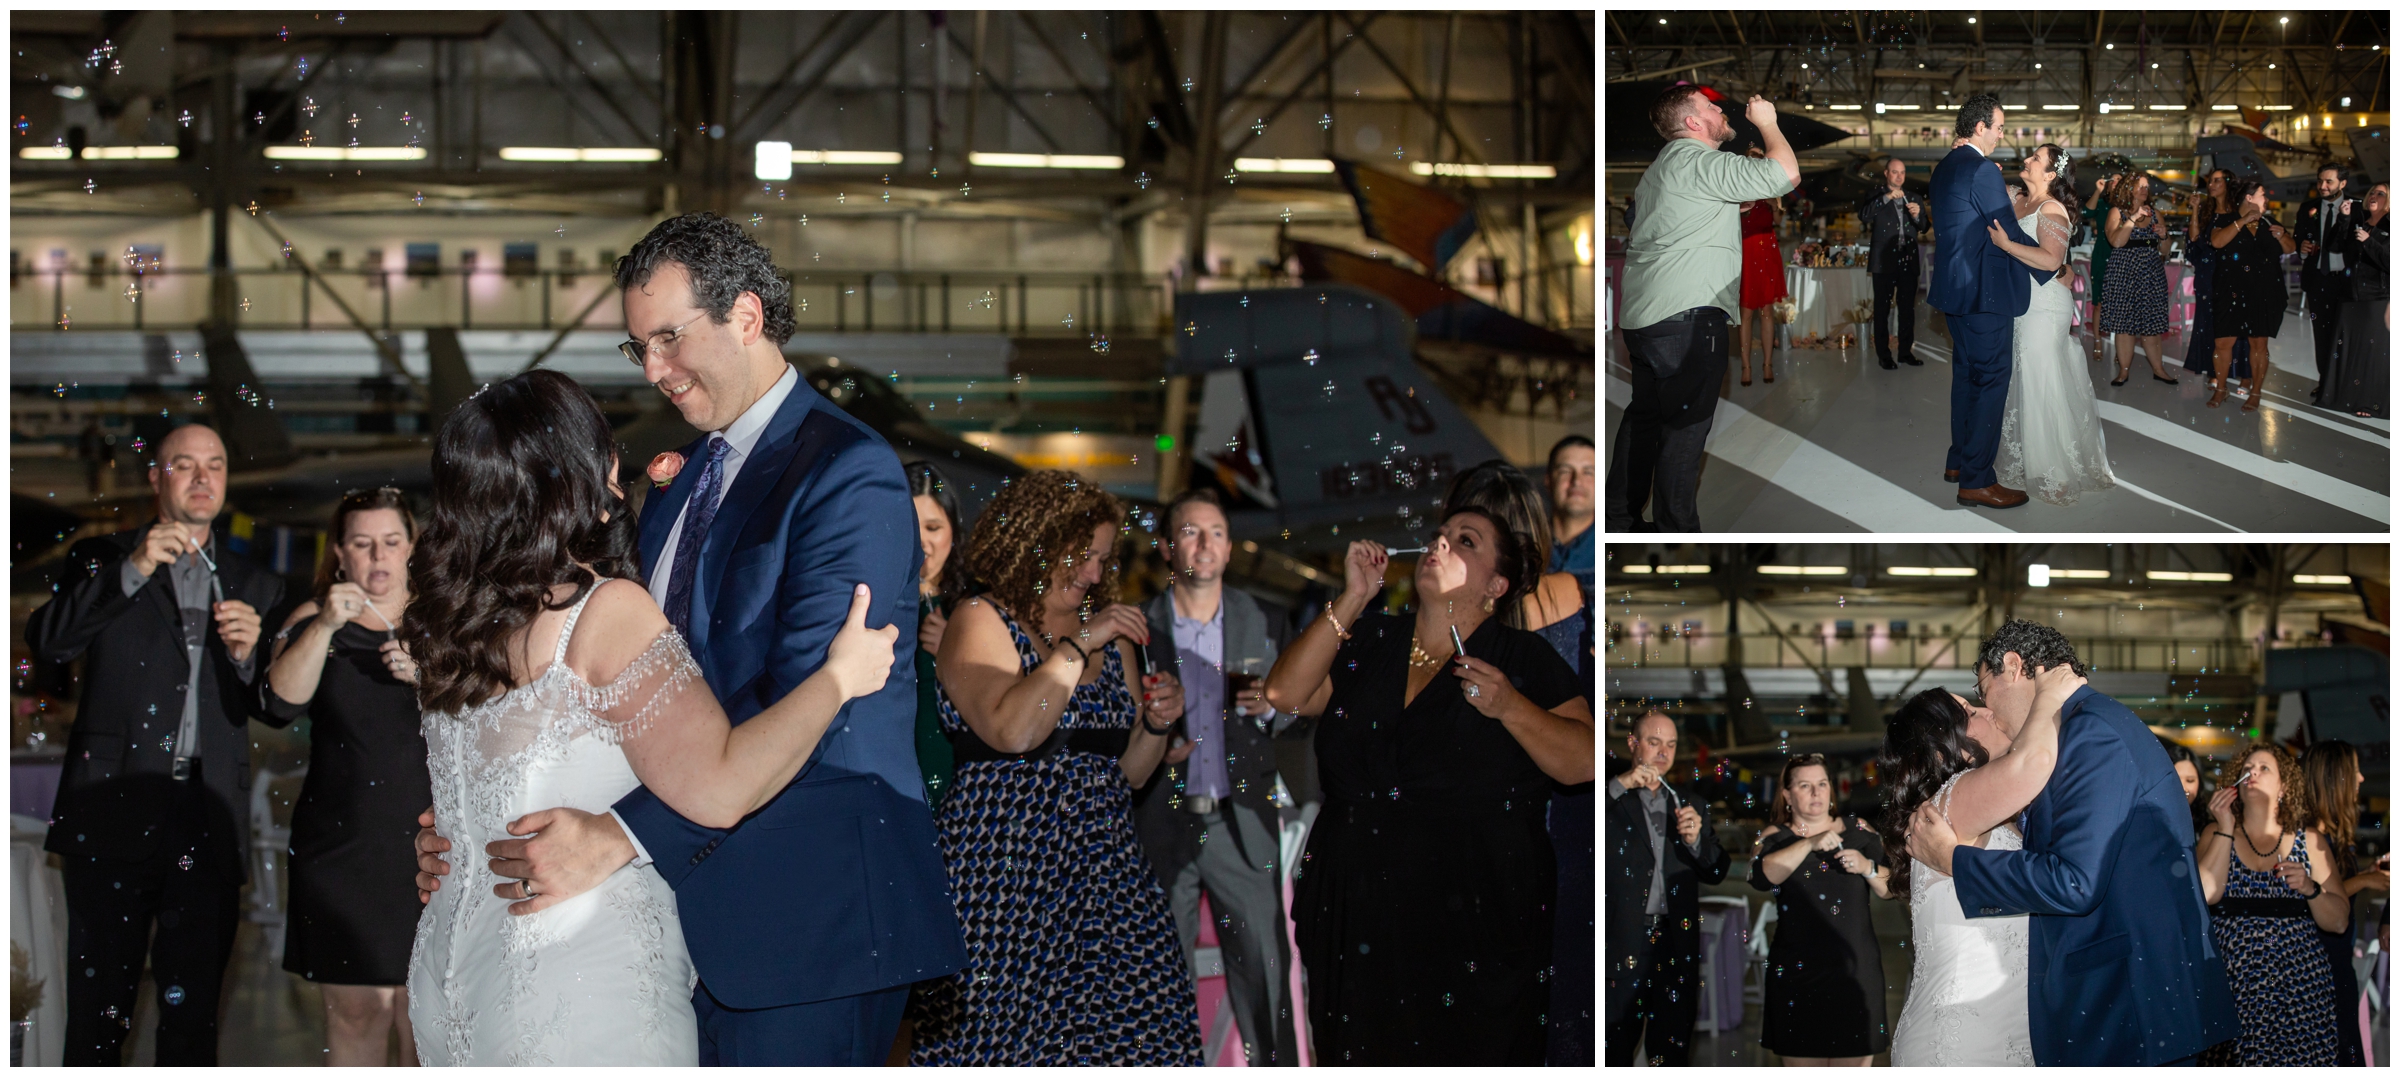 first dance at Denver Wings over the Rockies airplane museum wedding reception 